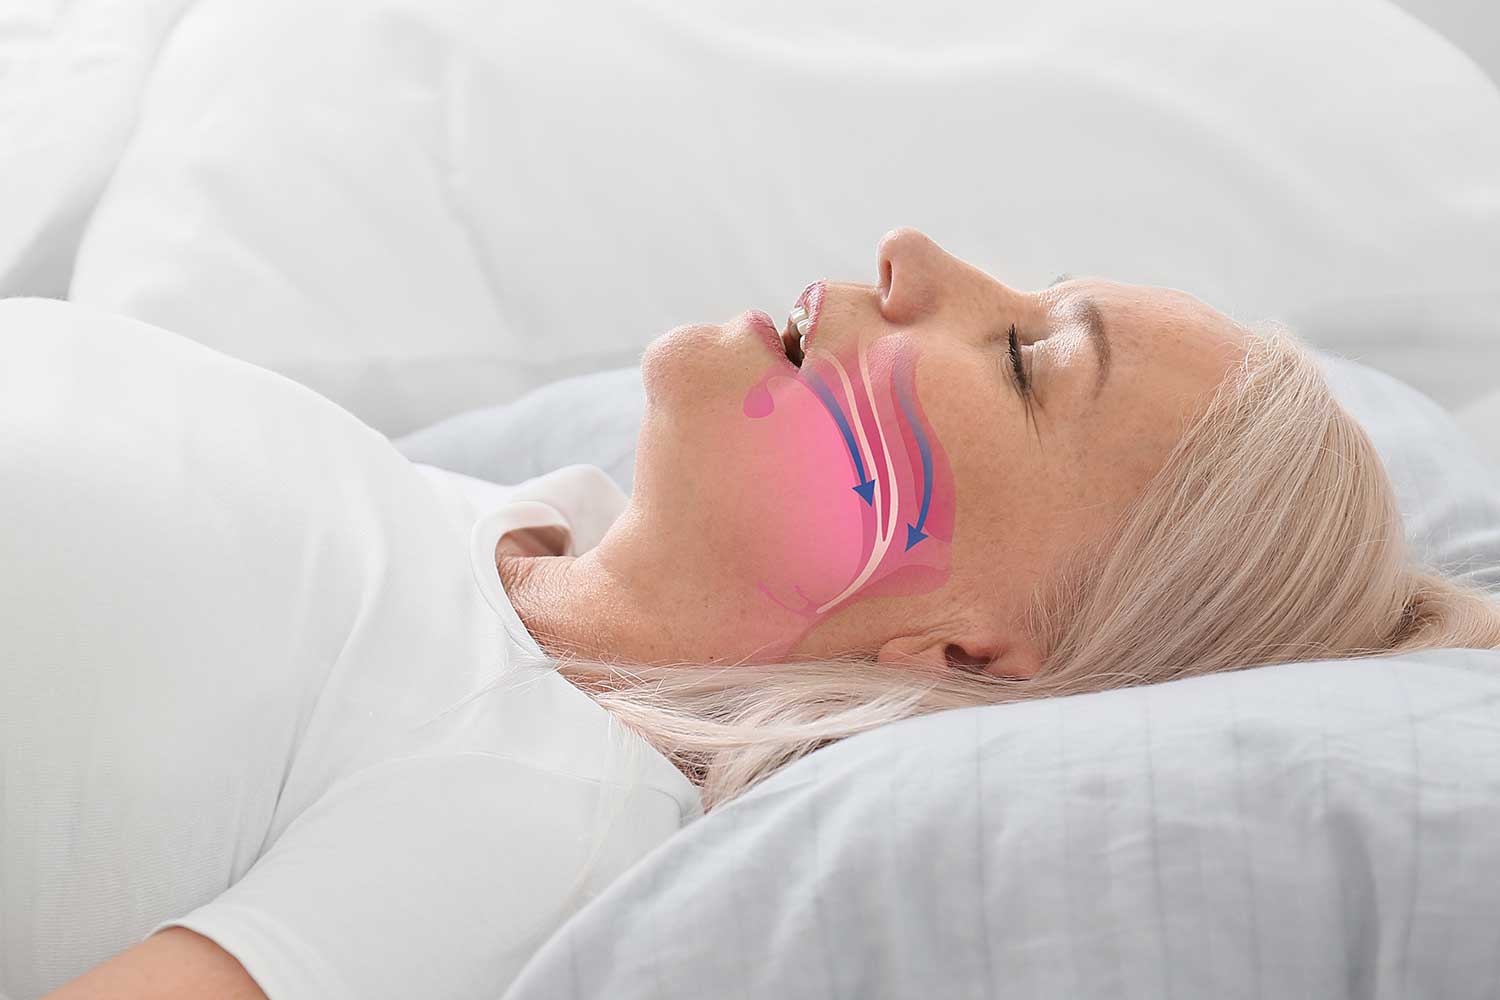 https://northfloridasleepsolutions.com/wp-content/uploads/2022/08/What-is-Positional-Obstructive-Sleep-Apnea-by-Accent-Sleep-Solutions-in-Gainesville-Florida.jpg